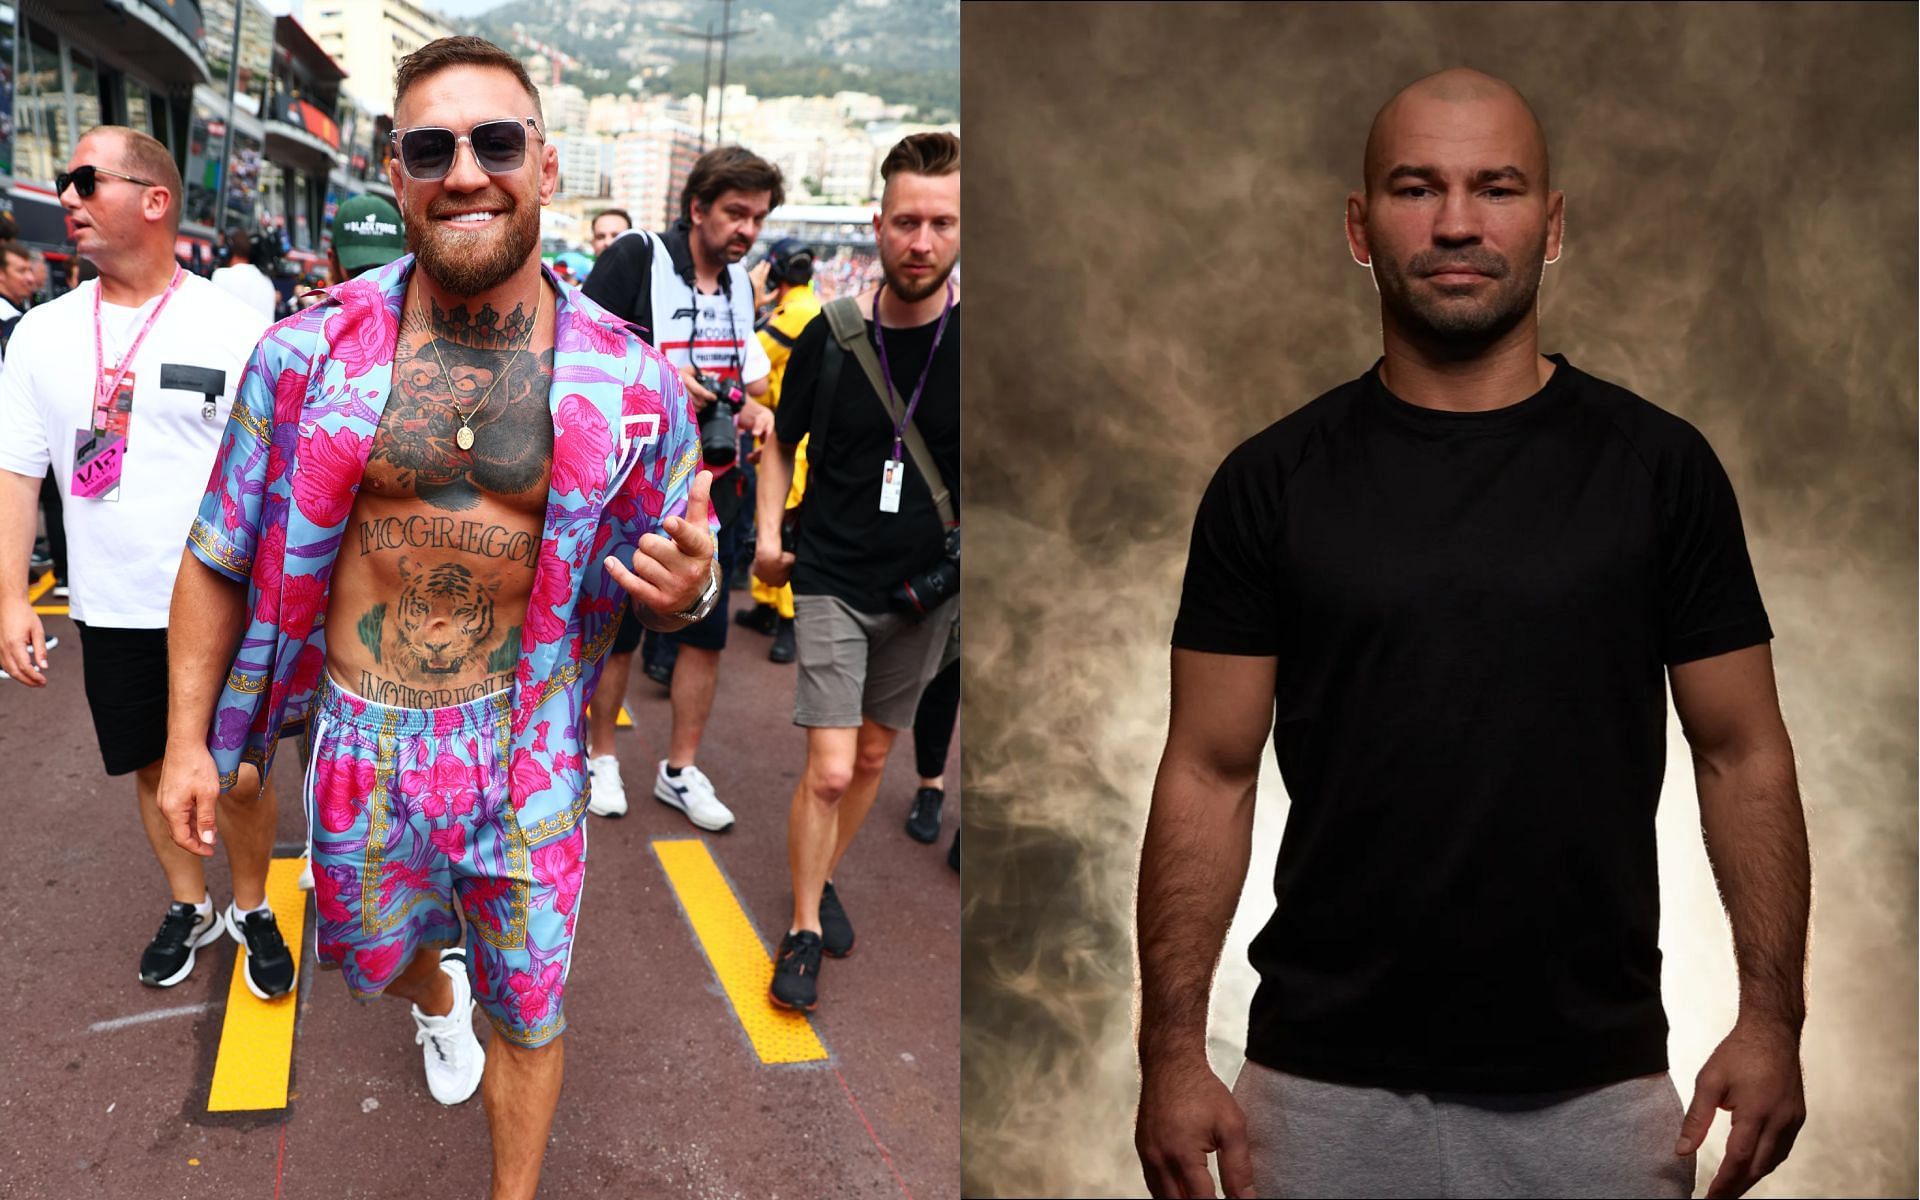 Conor McGregor (left) and Artem Lobov (right) [ Image Courtesy: Getty Images and @rushammer on Instagram] 